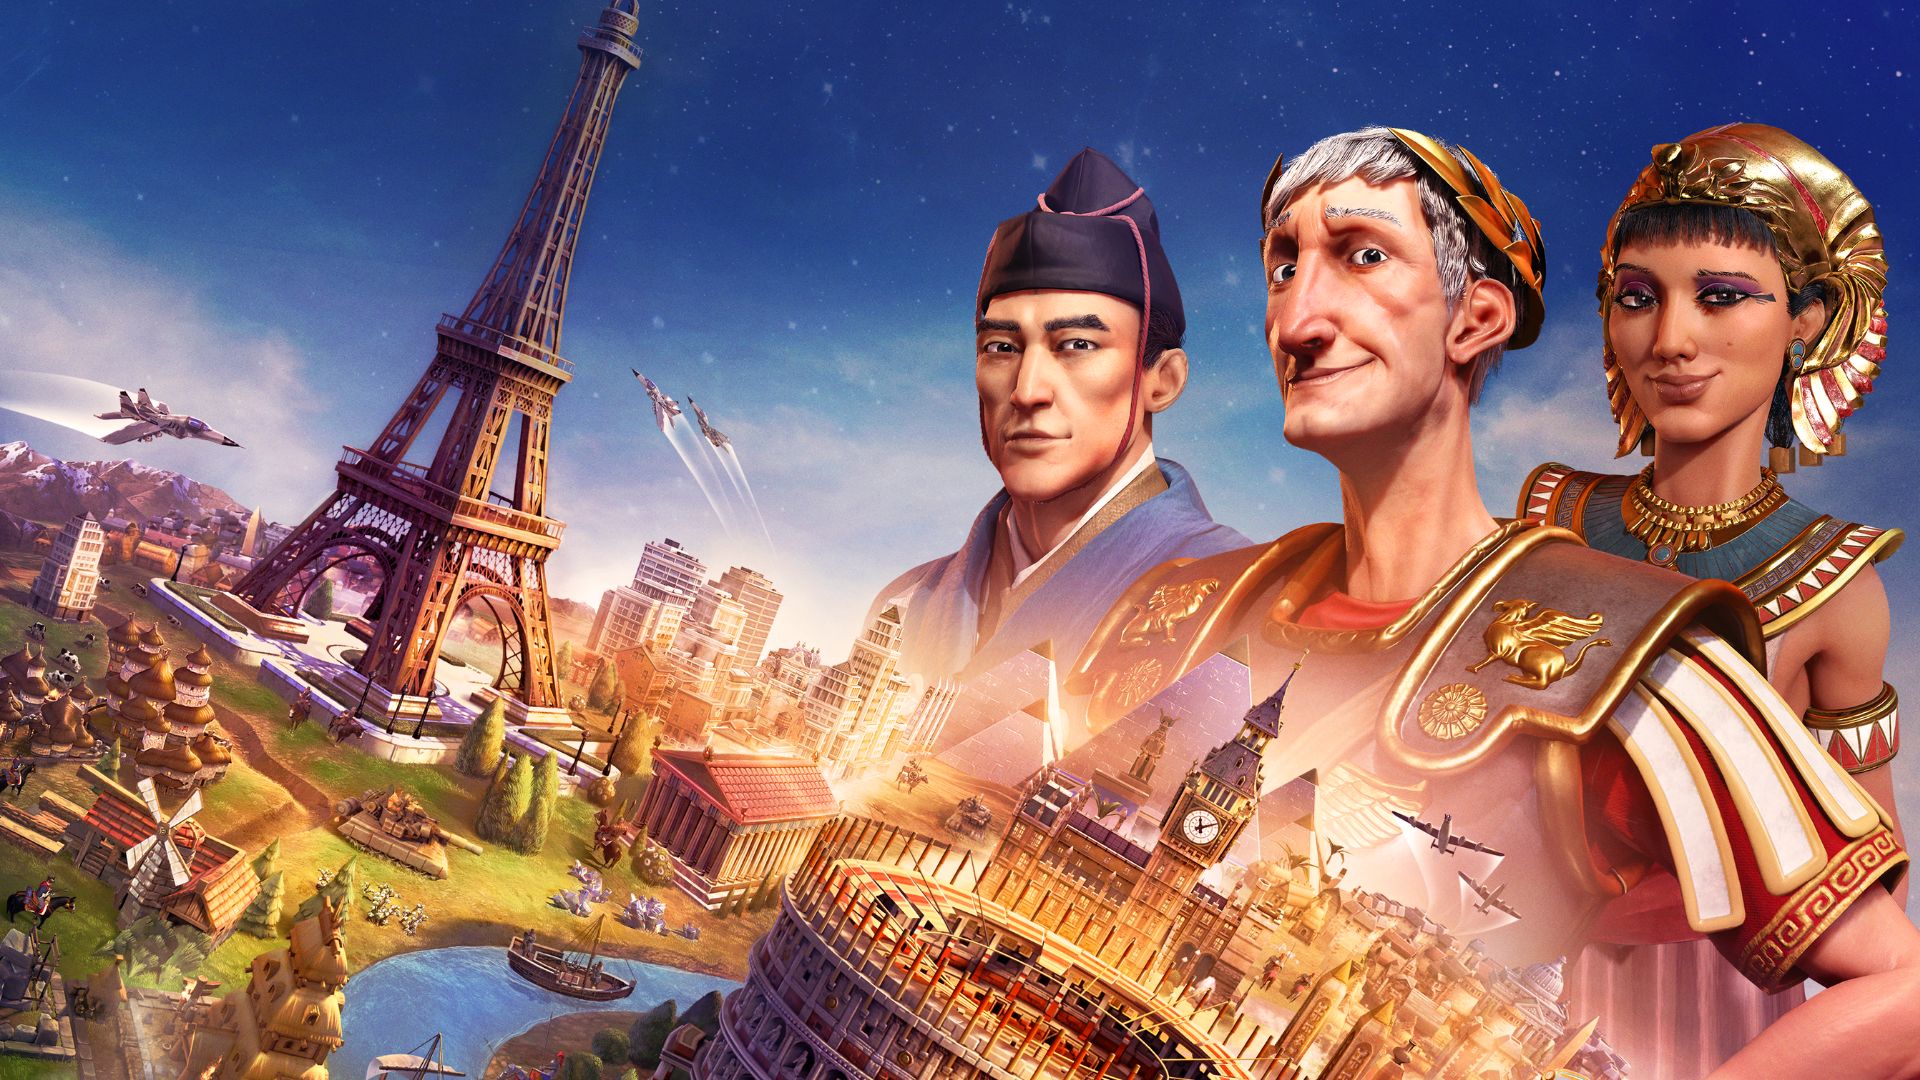 Art for Civilization VI, showing the Eiffel Tower, the colosseum, and various buildings on a globe. In the sky is art of the Roman emperor Trajan, Japanese leader Hojo Tokimune, and Egyptian leader Cleopatra.